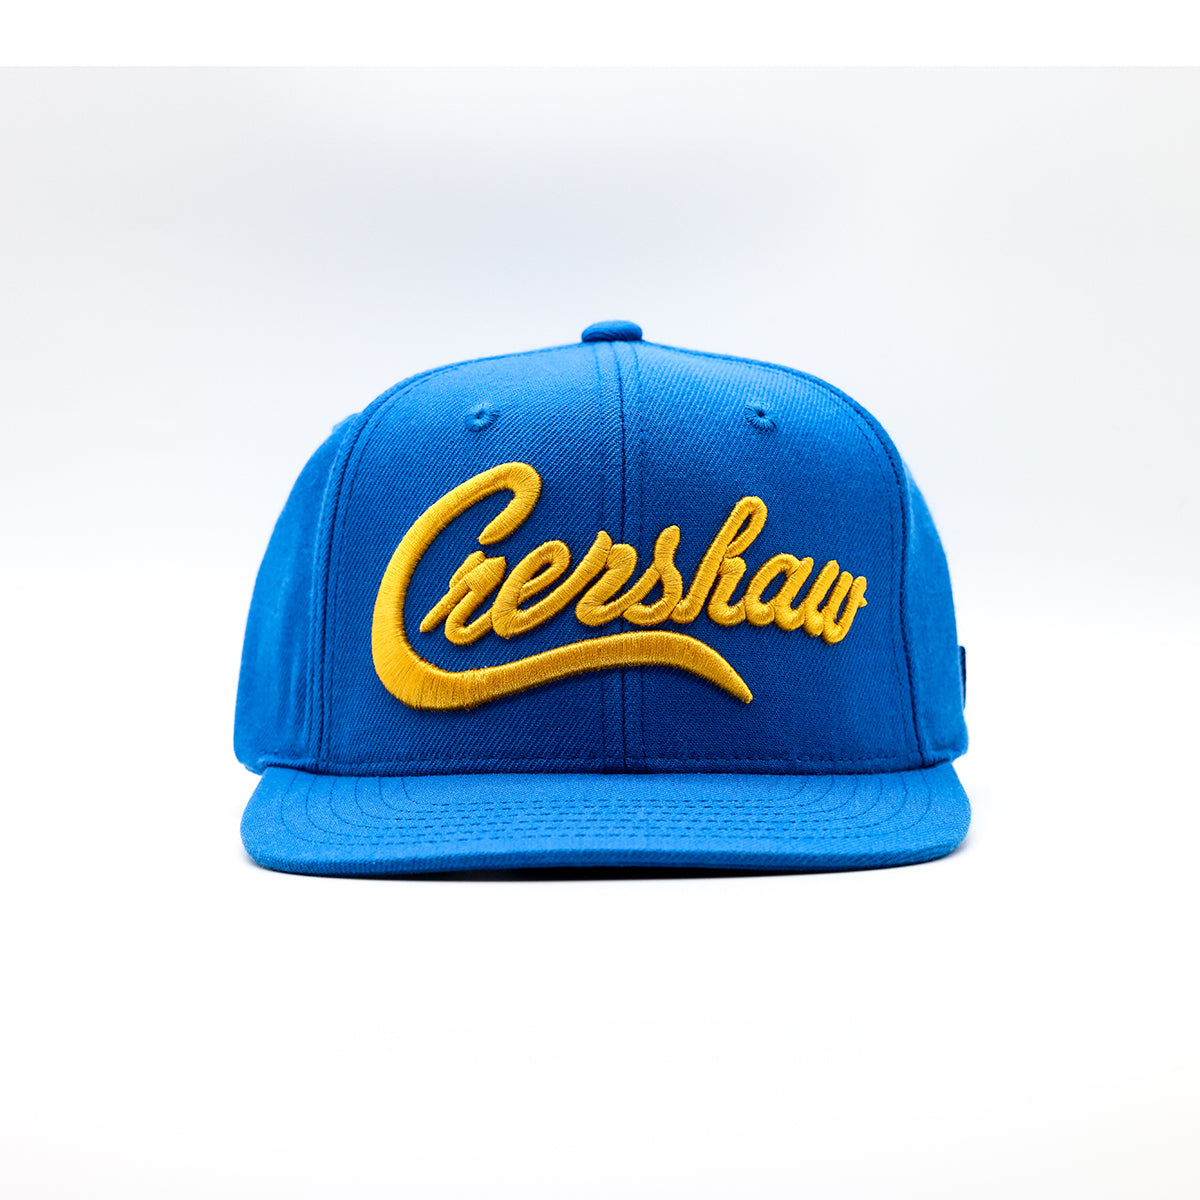 Crenshaw Limited Edition Snapback - Royal/Yellow [3D] - Front